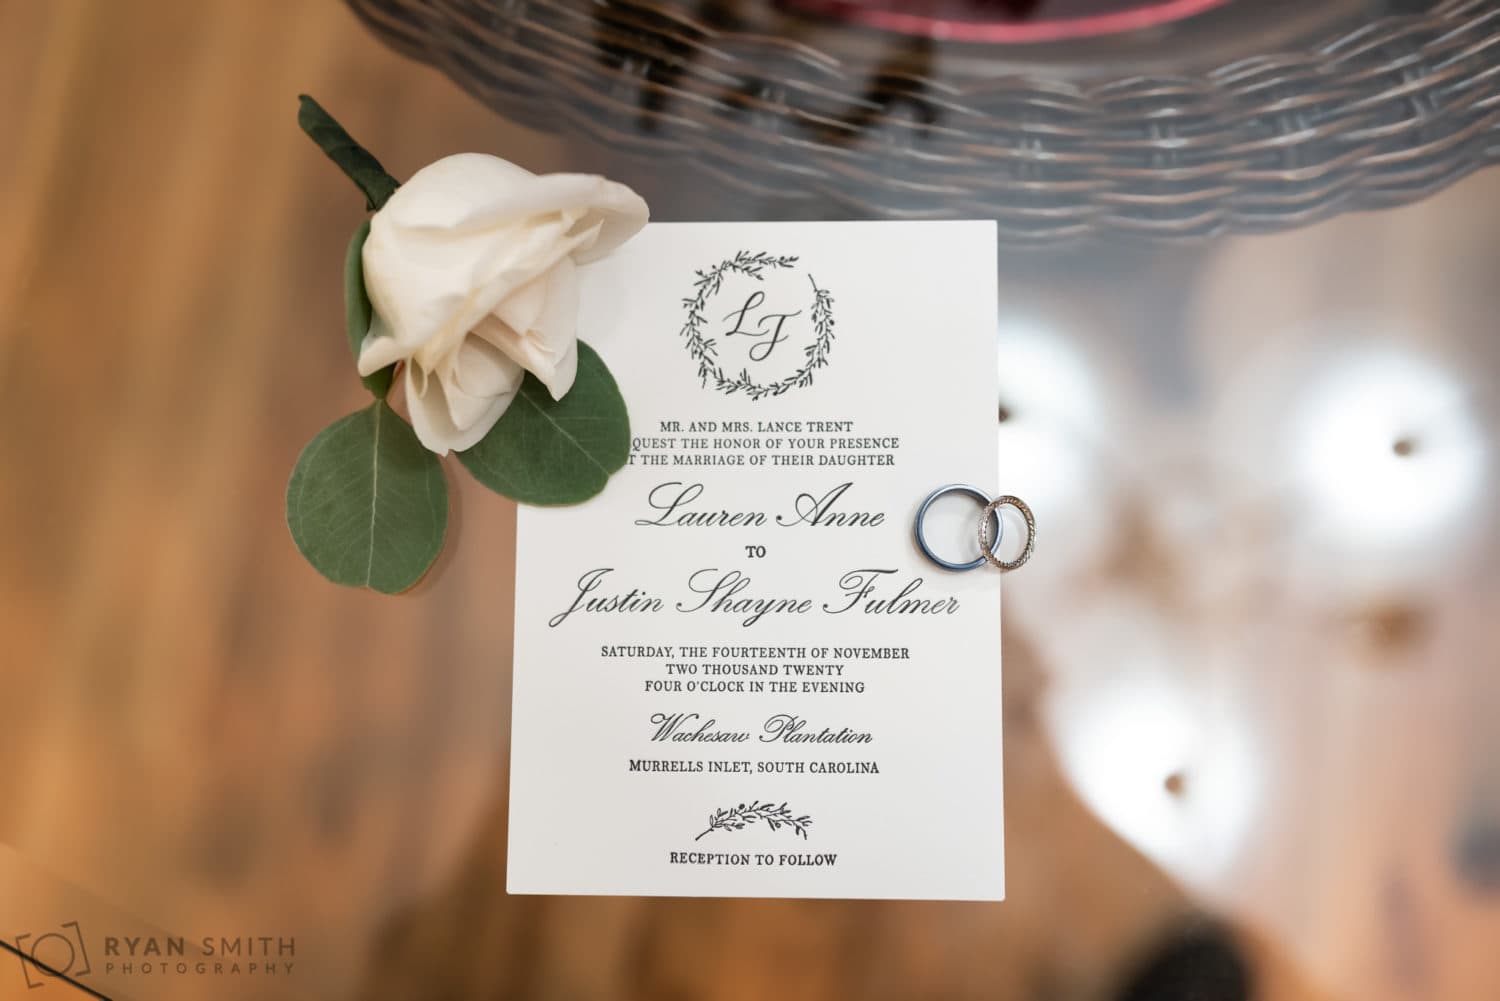 Invitation with rings and boutonniere  - Wachesaw Plantation